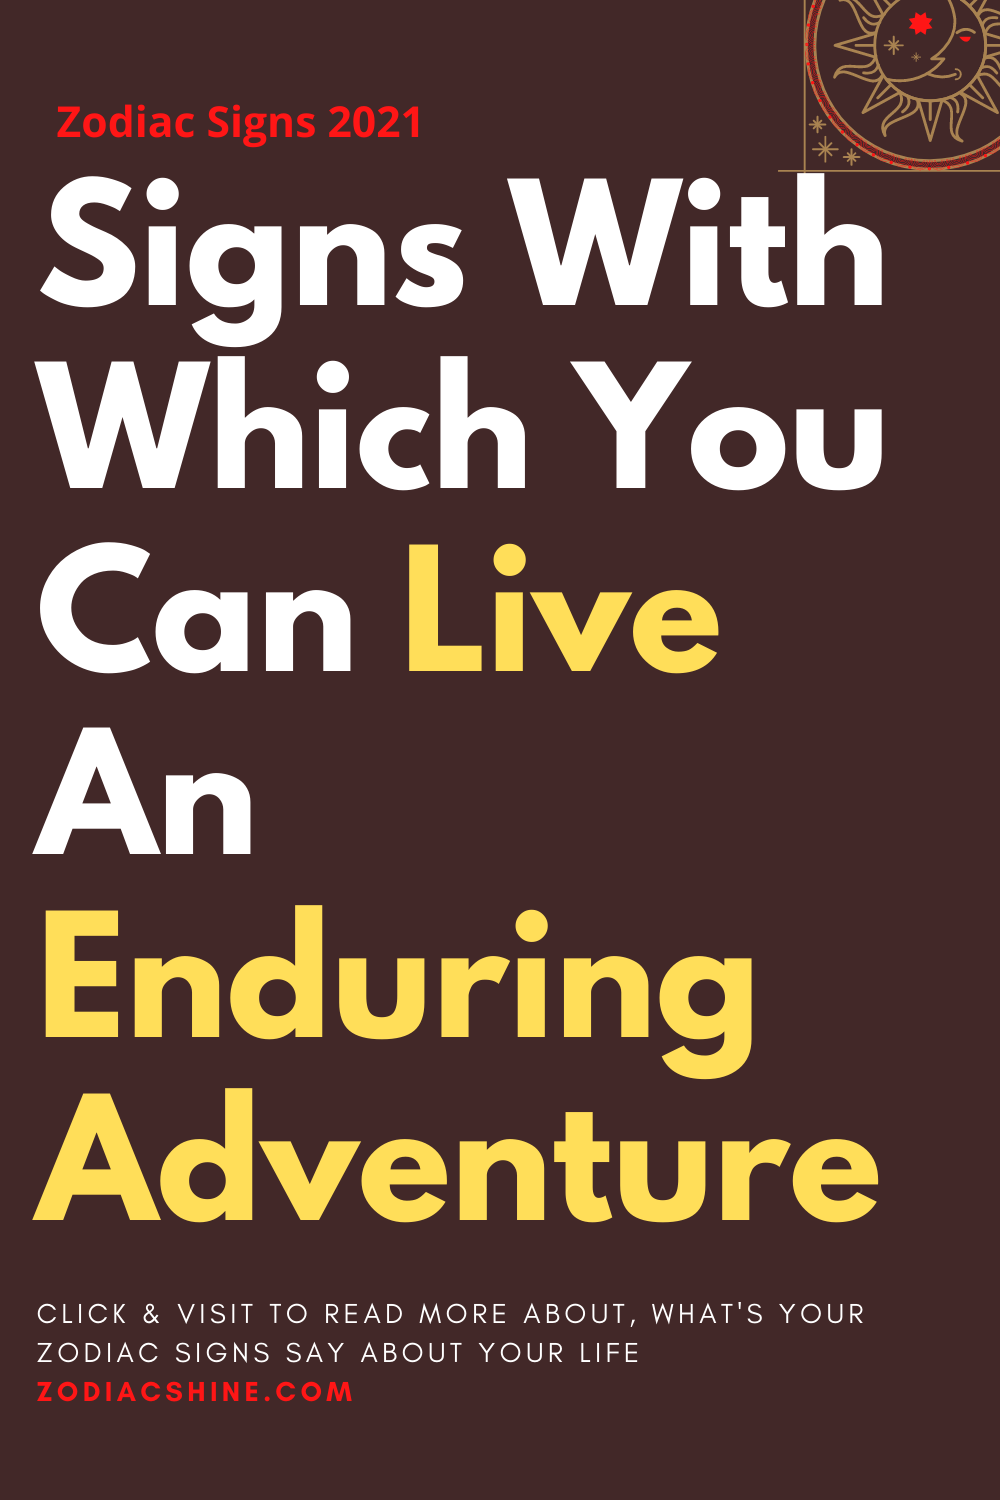 Signs With Which You Can Live An Enduring Adventure